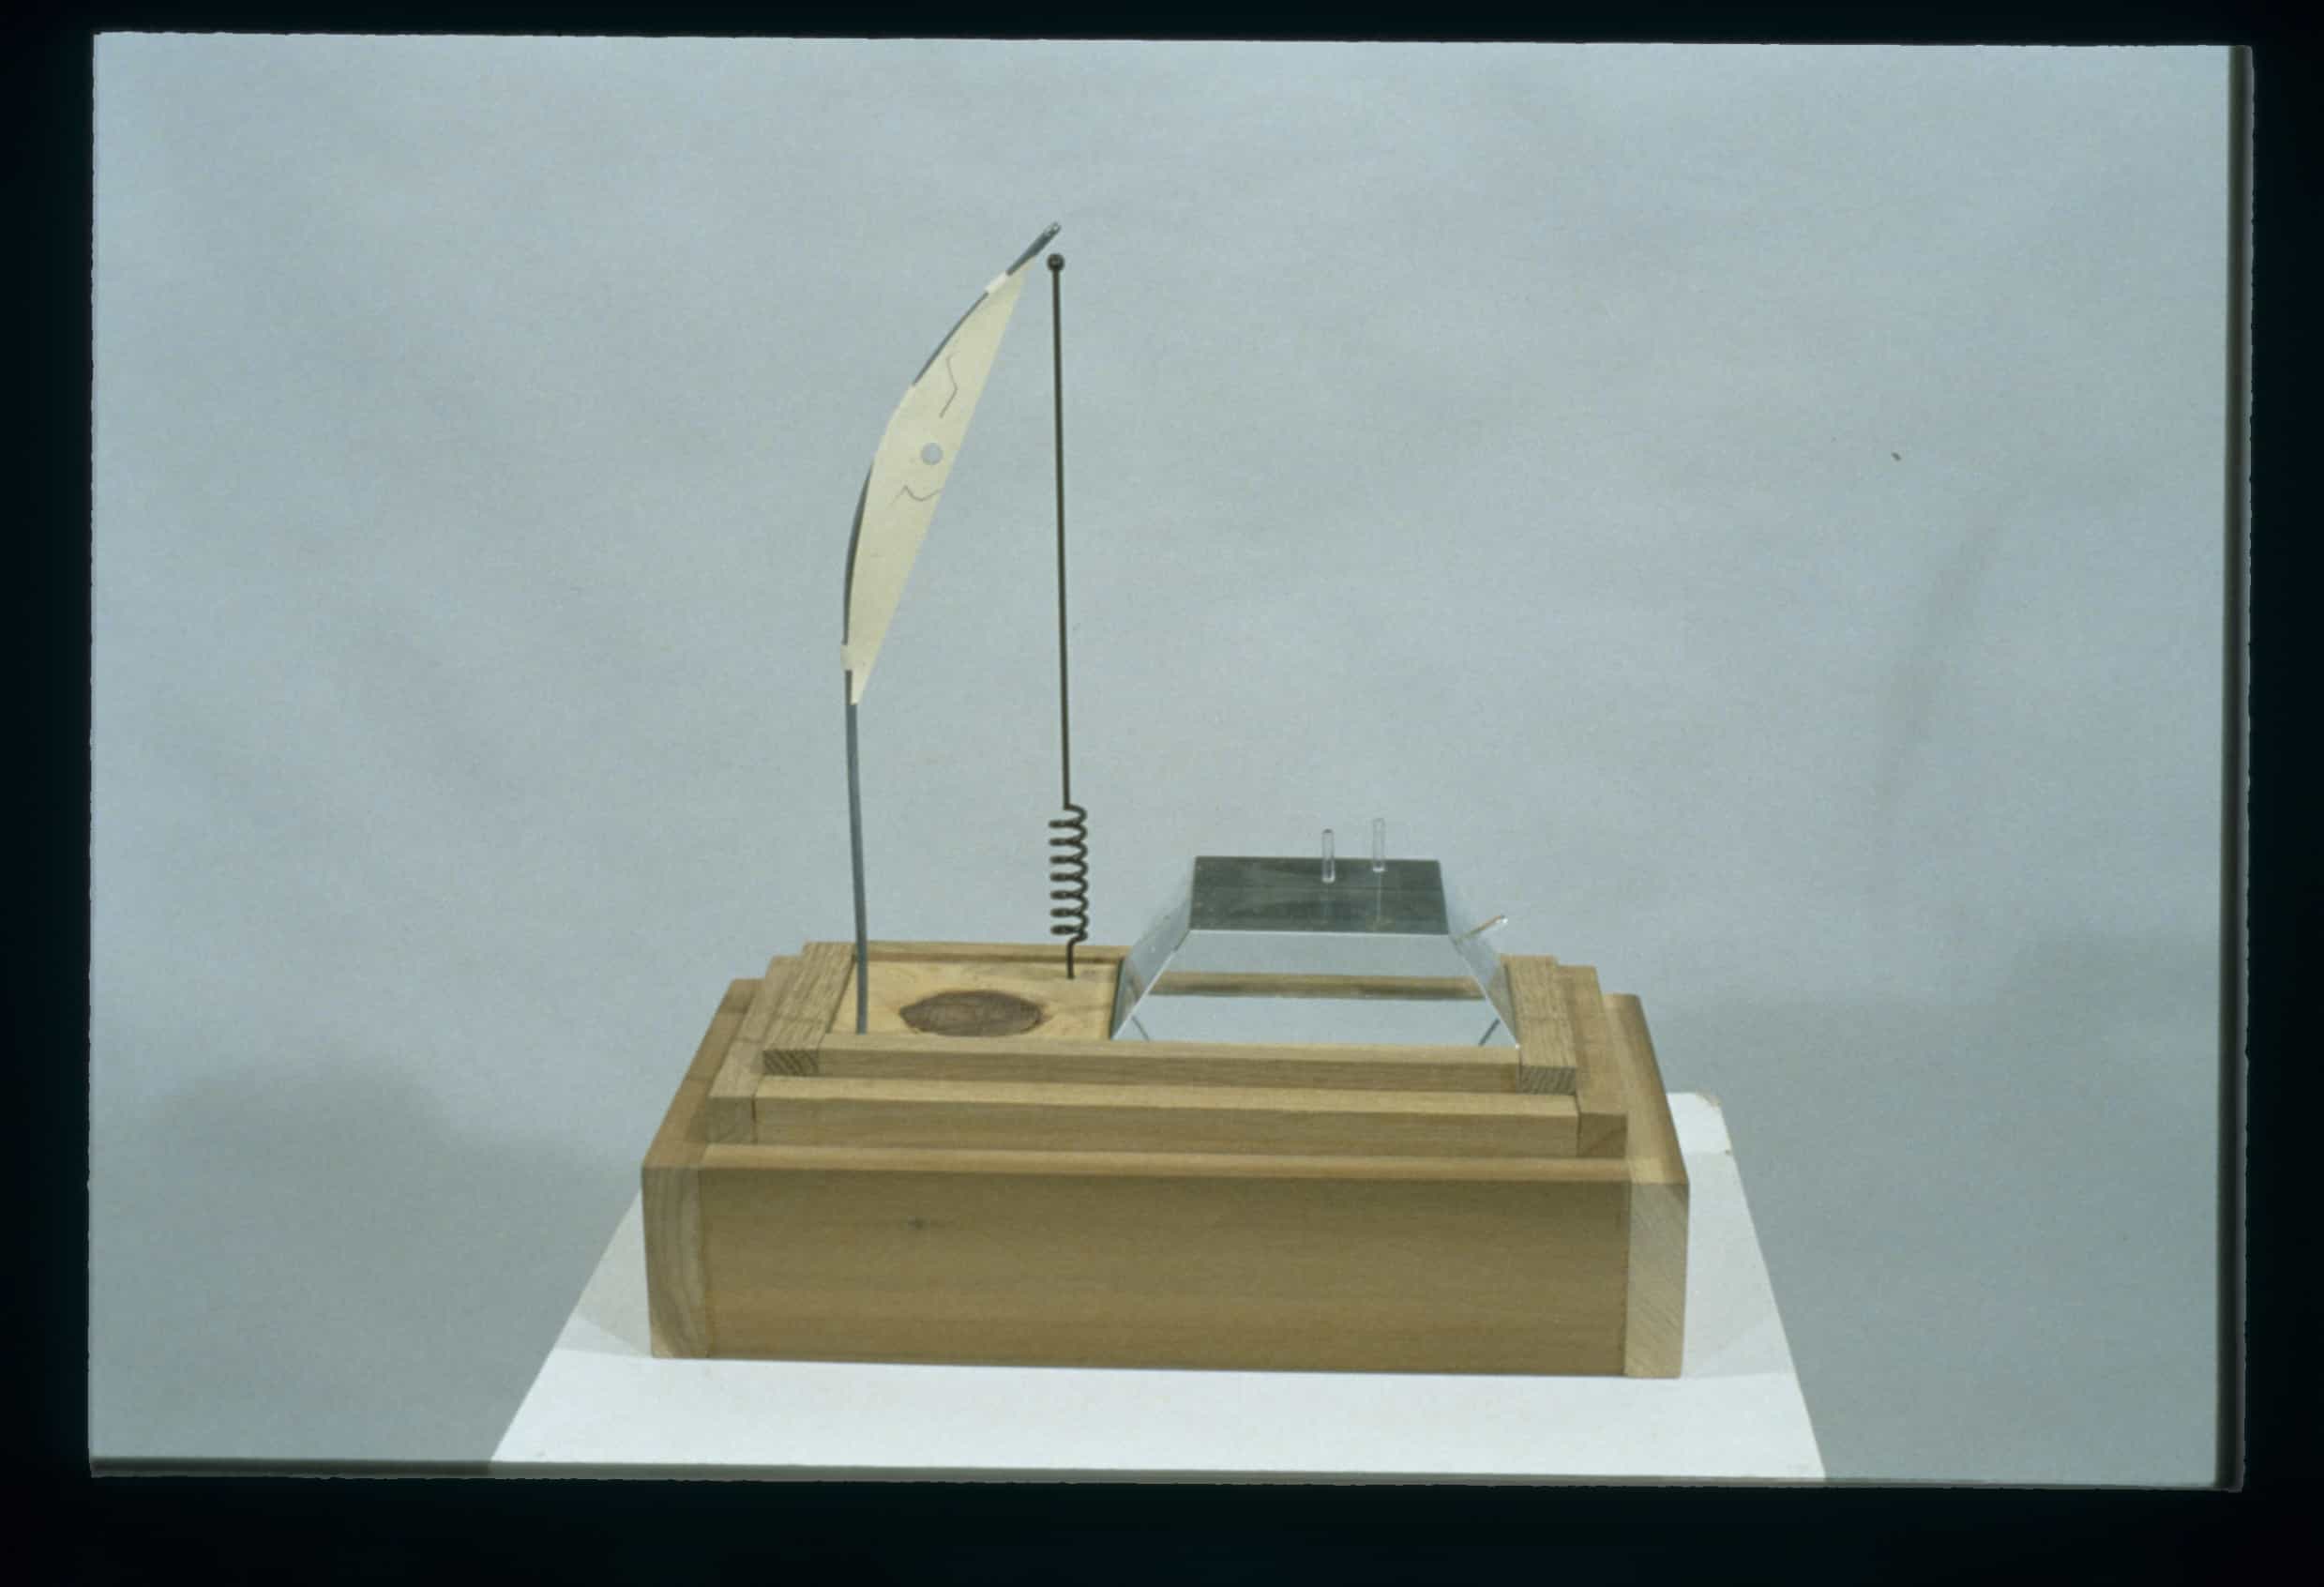 "Receiver" 1990, Wood, Glass, Metal, Drawing on Paper, 15"H x 14"W x 8"D